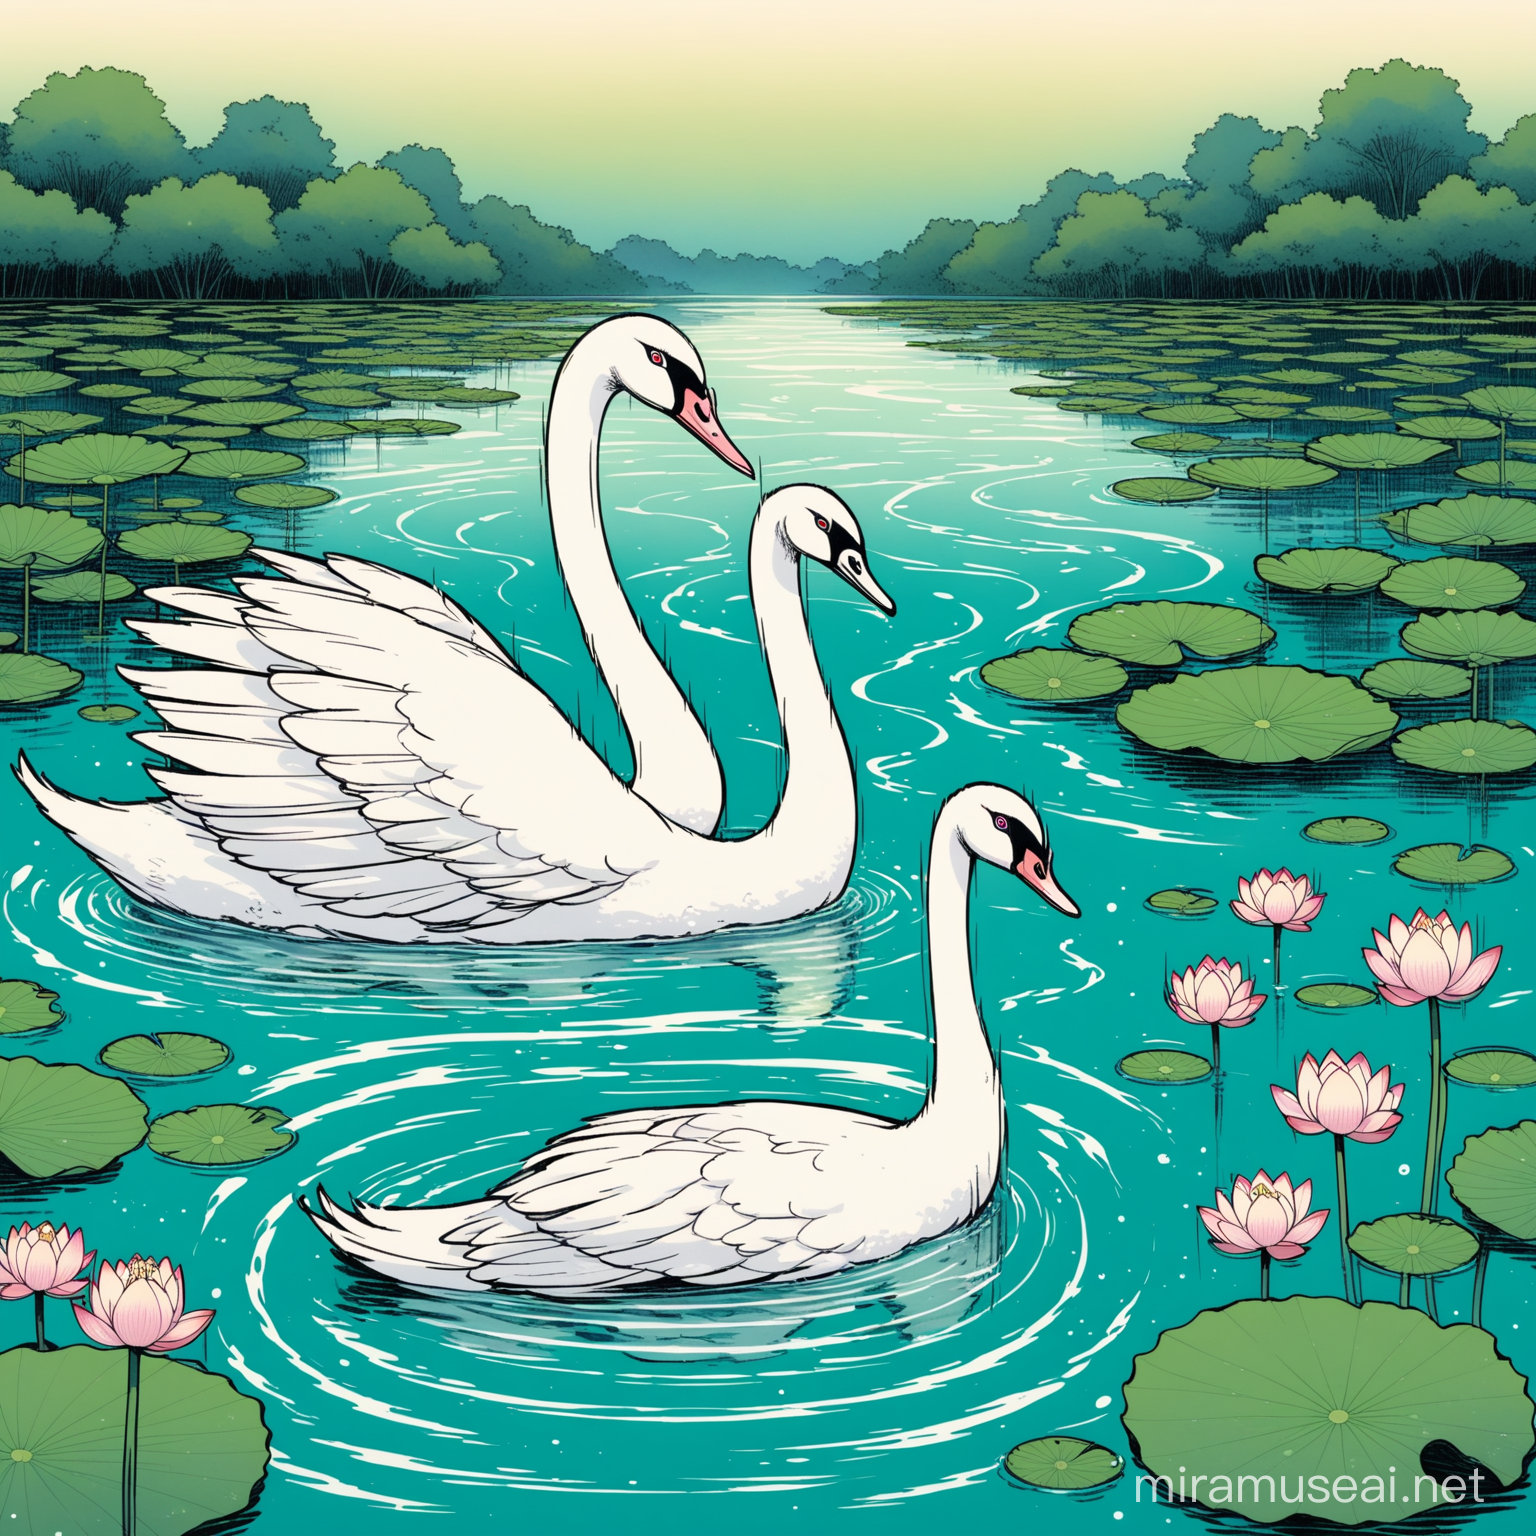 Lotus Pond Water with Swan Crane and Peacock Hybrid Creature in Junji Ito Style